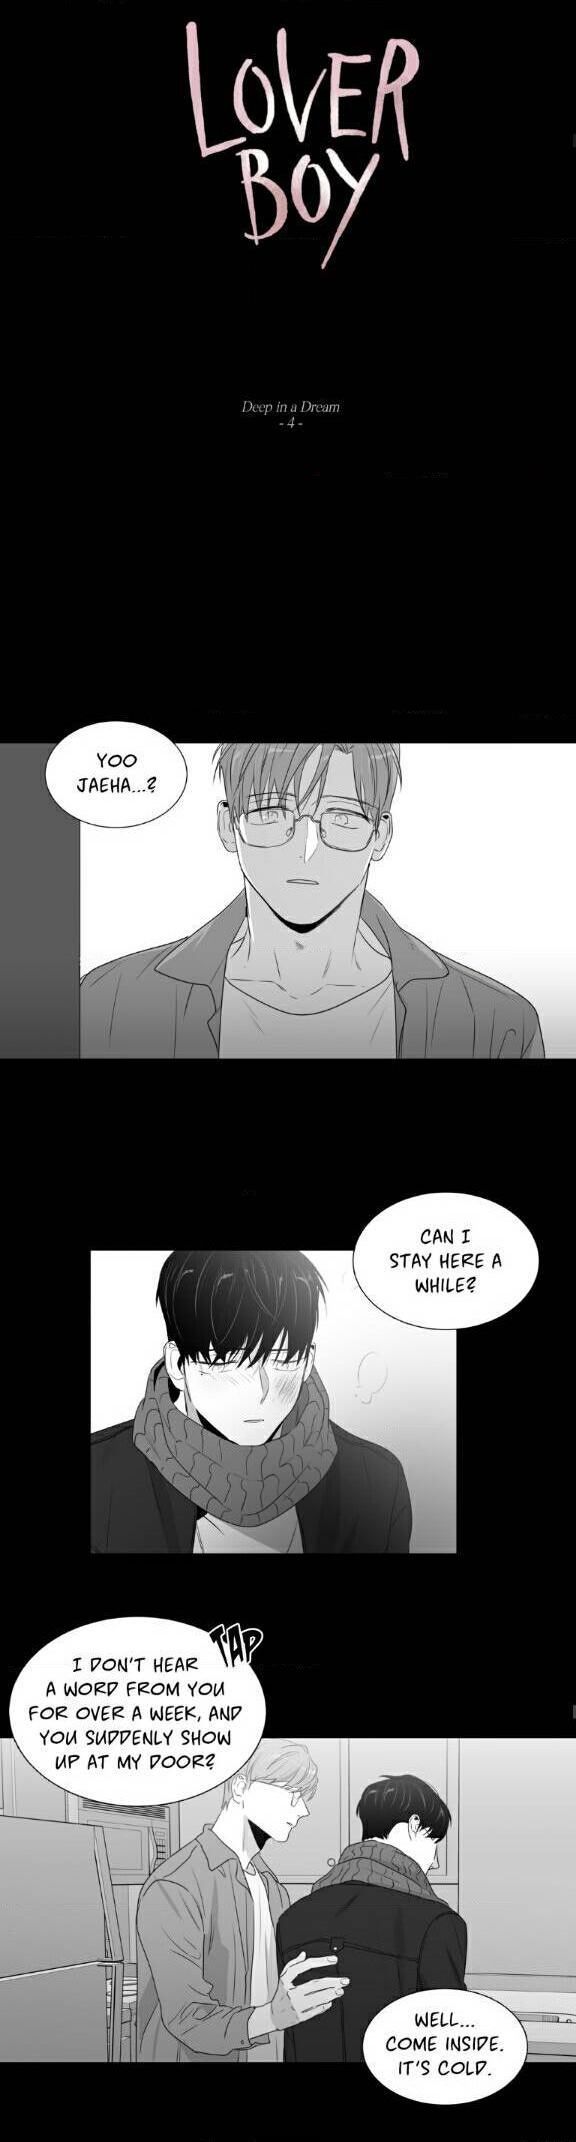 Lover Boy (Lezhin) Chapter 048.4 page 5